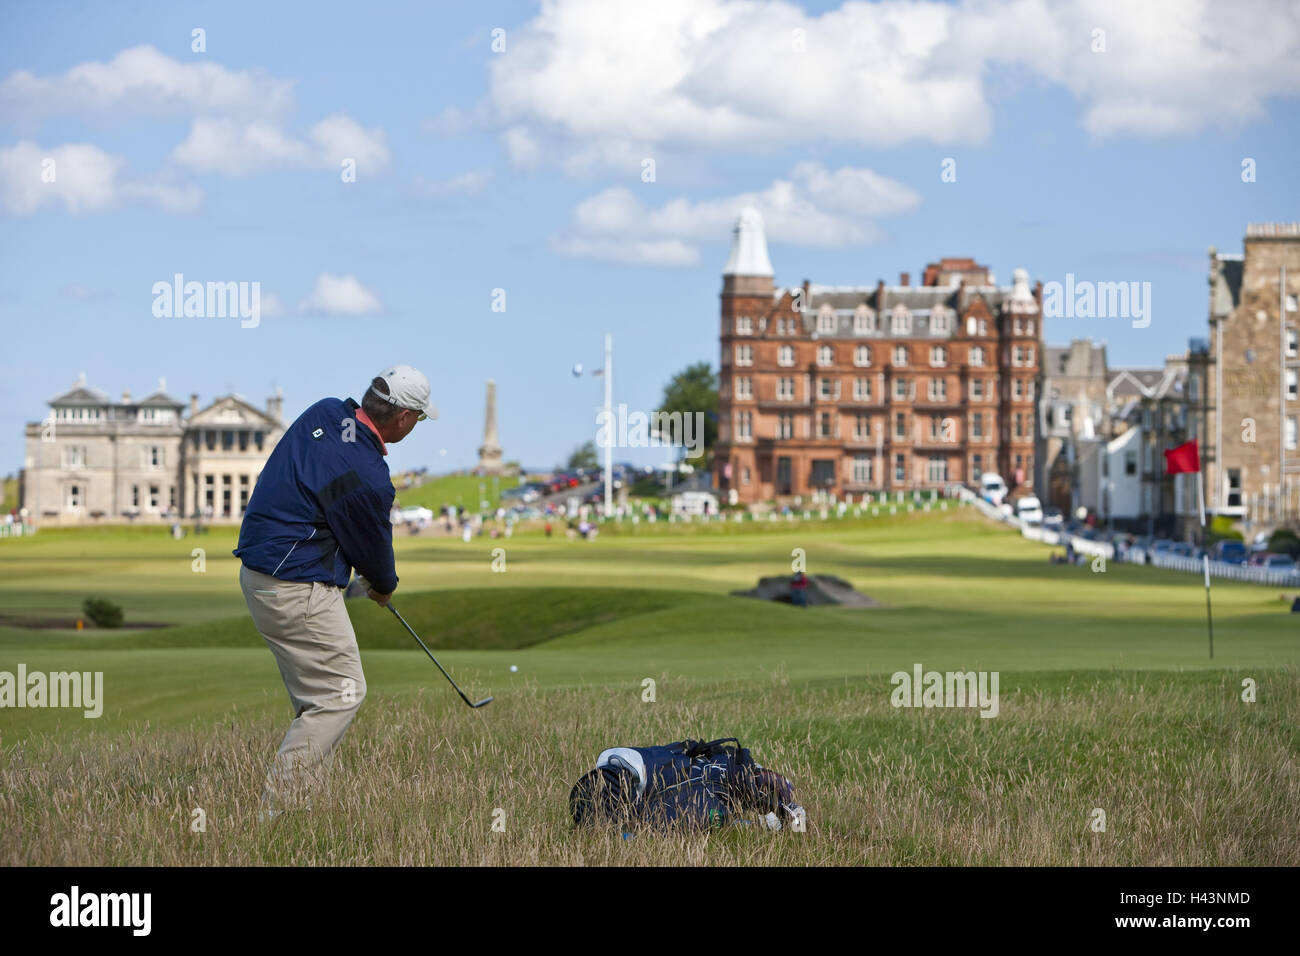 Great Britain, Scotland, Fife, St. Andrews, Old Course royal and Ancient golf Club, St. Andrews golf club, golfer, Stock Photo